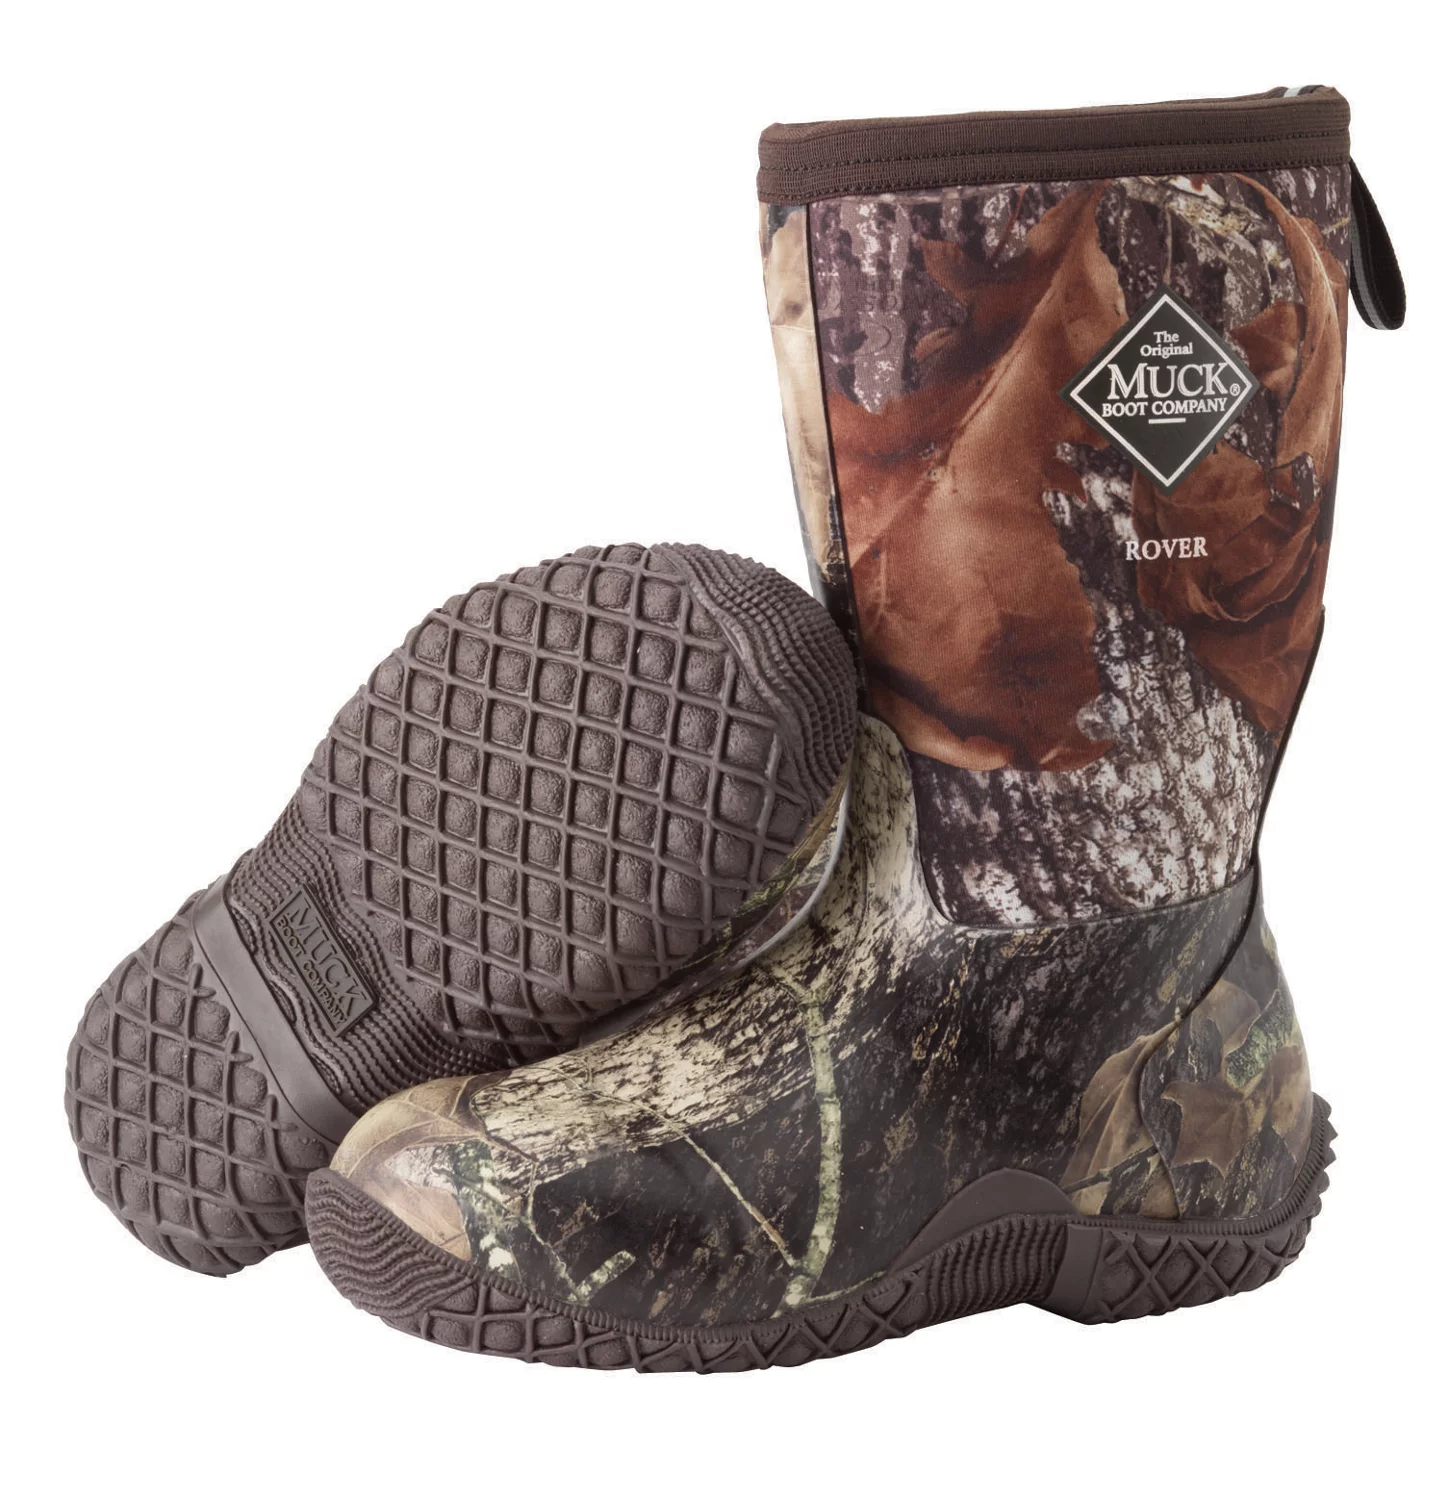 Boys' Hunting Boots | Boys' Camo Boots, Boys' Hunting Shoes | Academy